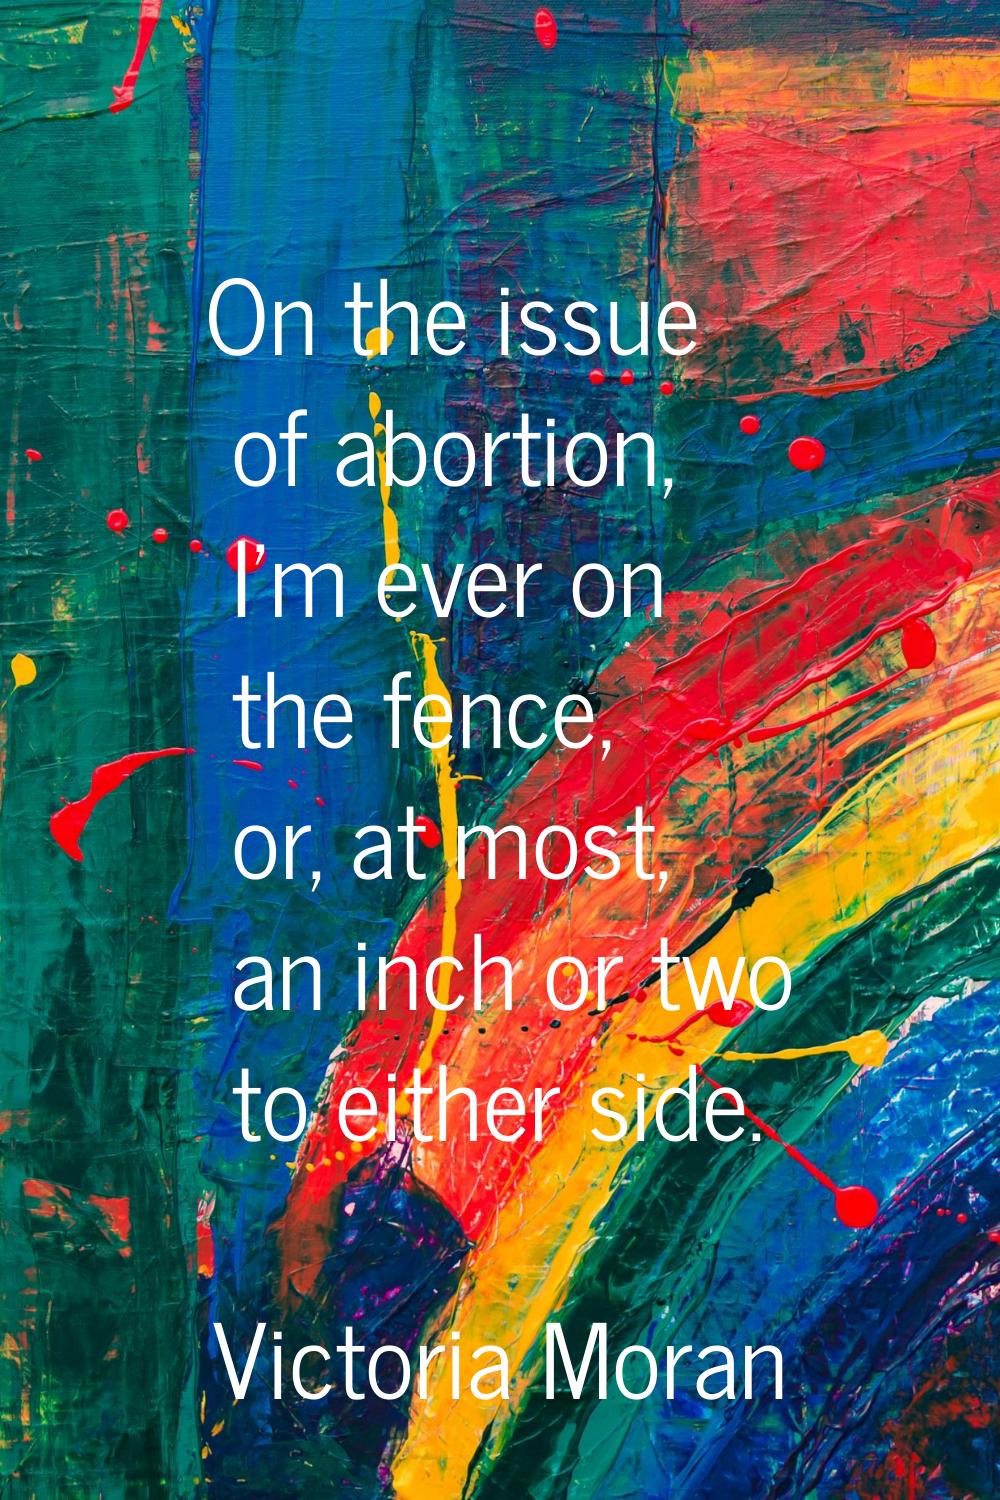 On the issue of abortion, I'm ever on the fence, or, at most, an inch or two to either side.